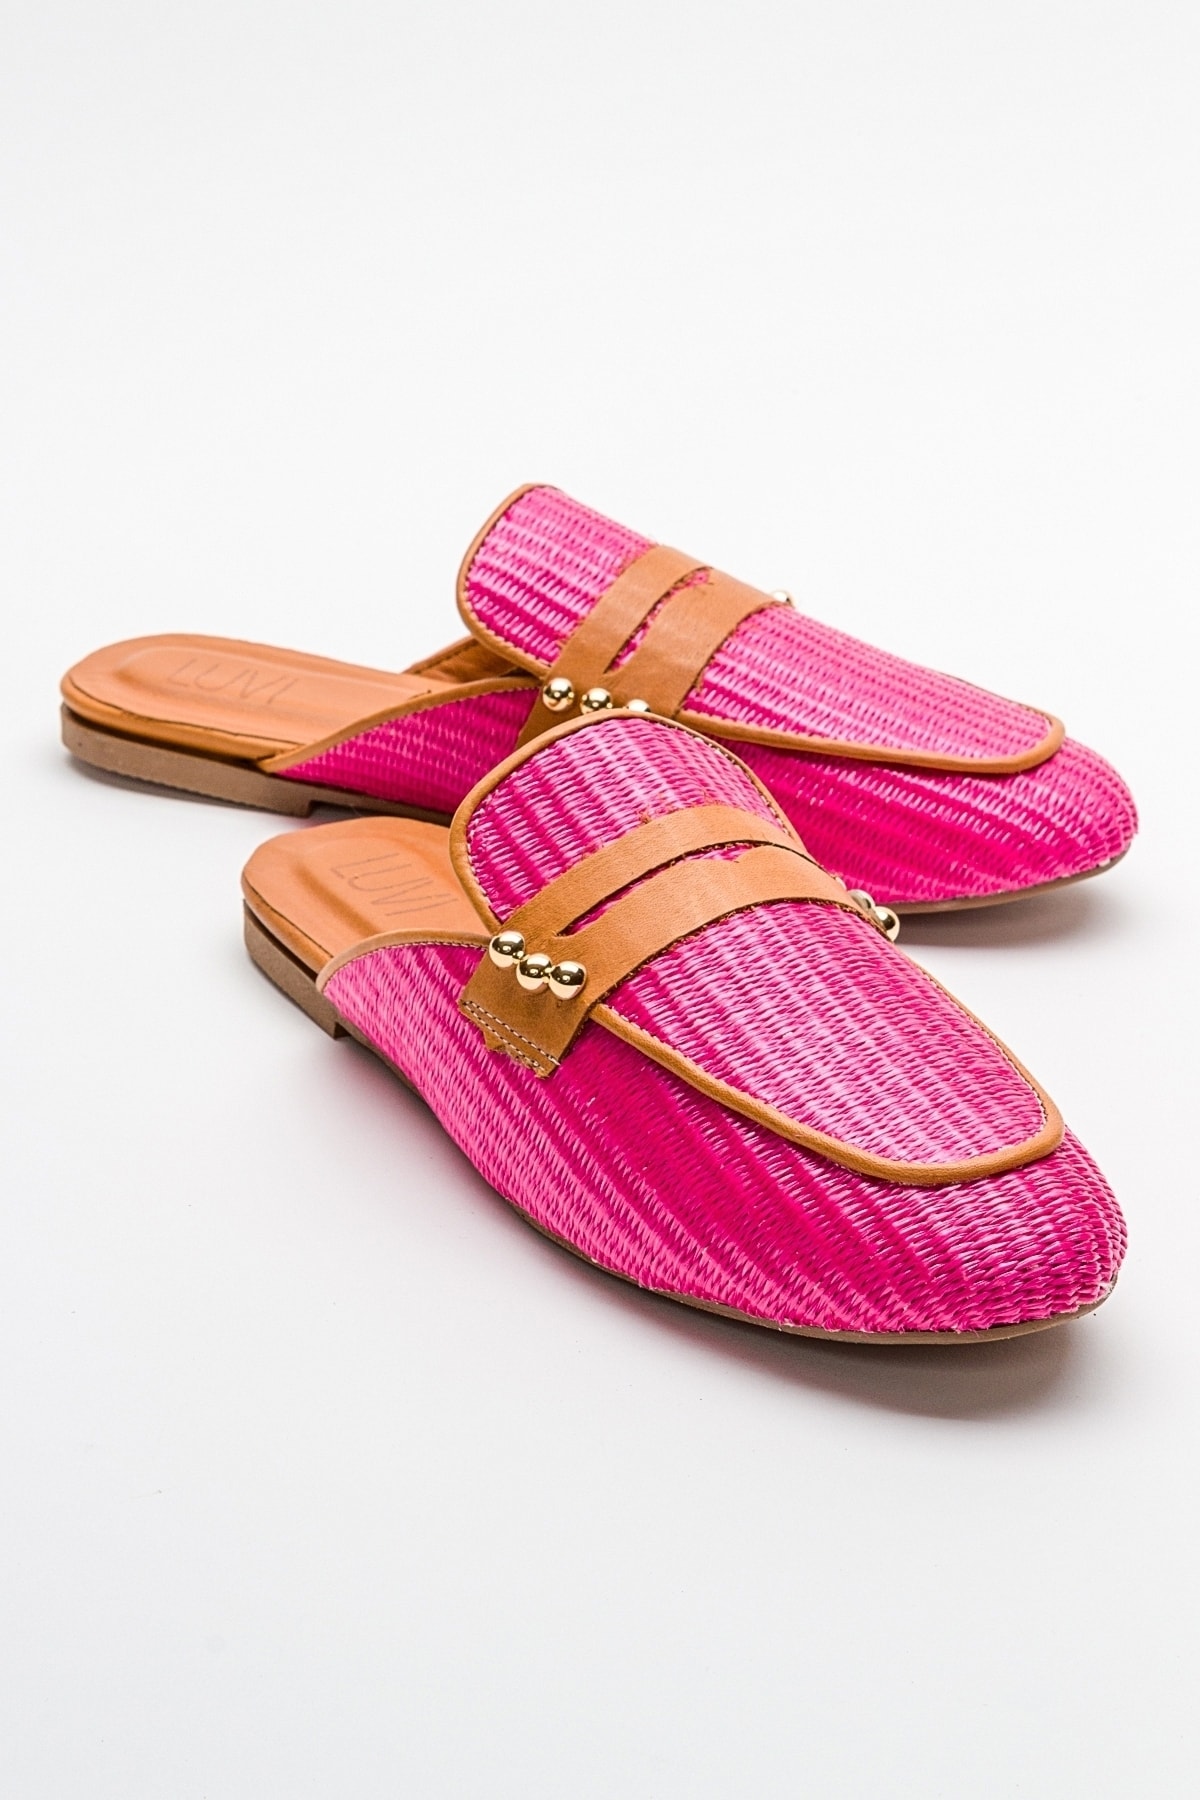 Levně LuviShoes 165 Women's Slippers From Genuine Leather, Pink Straw